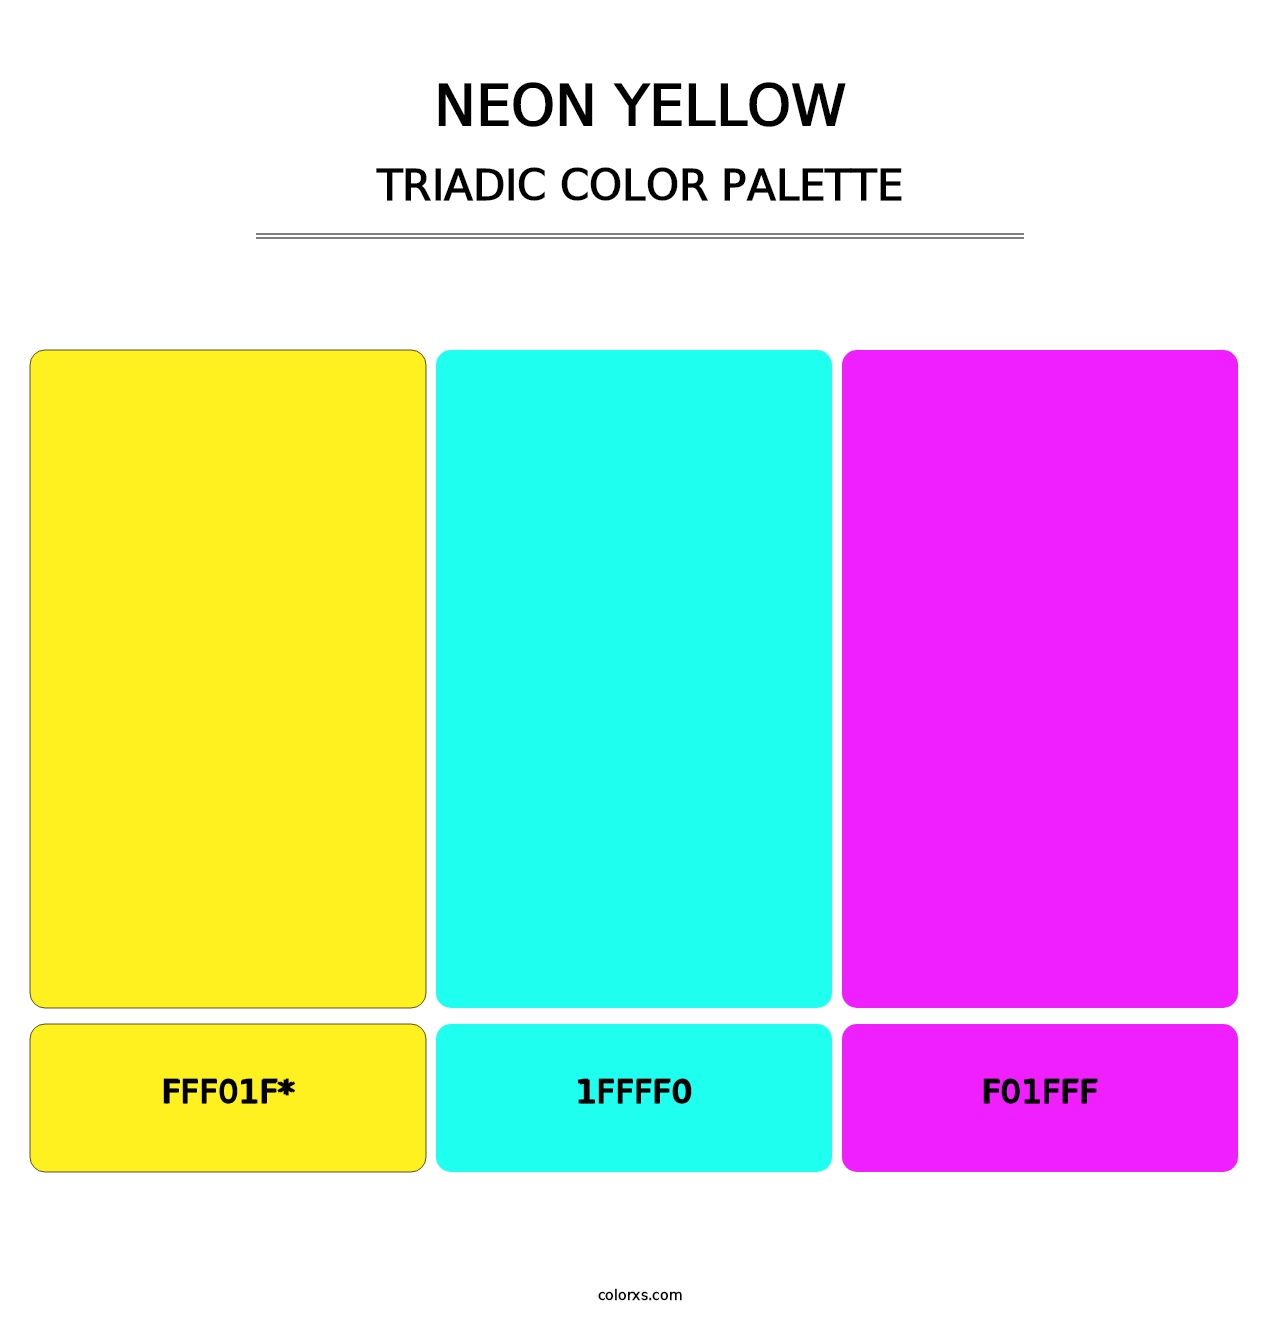 Neon Yellow - Triadic Color Palette